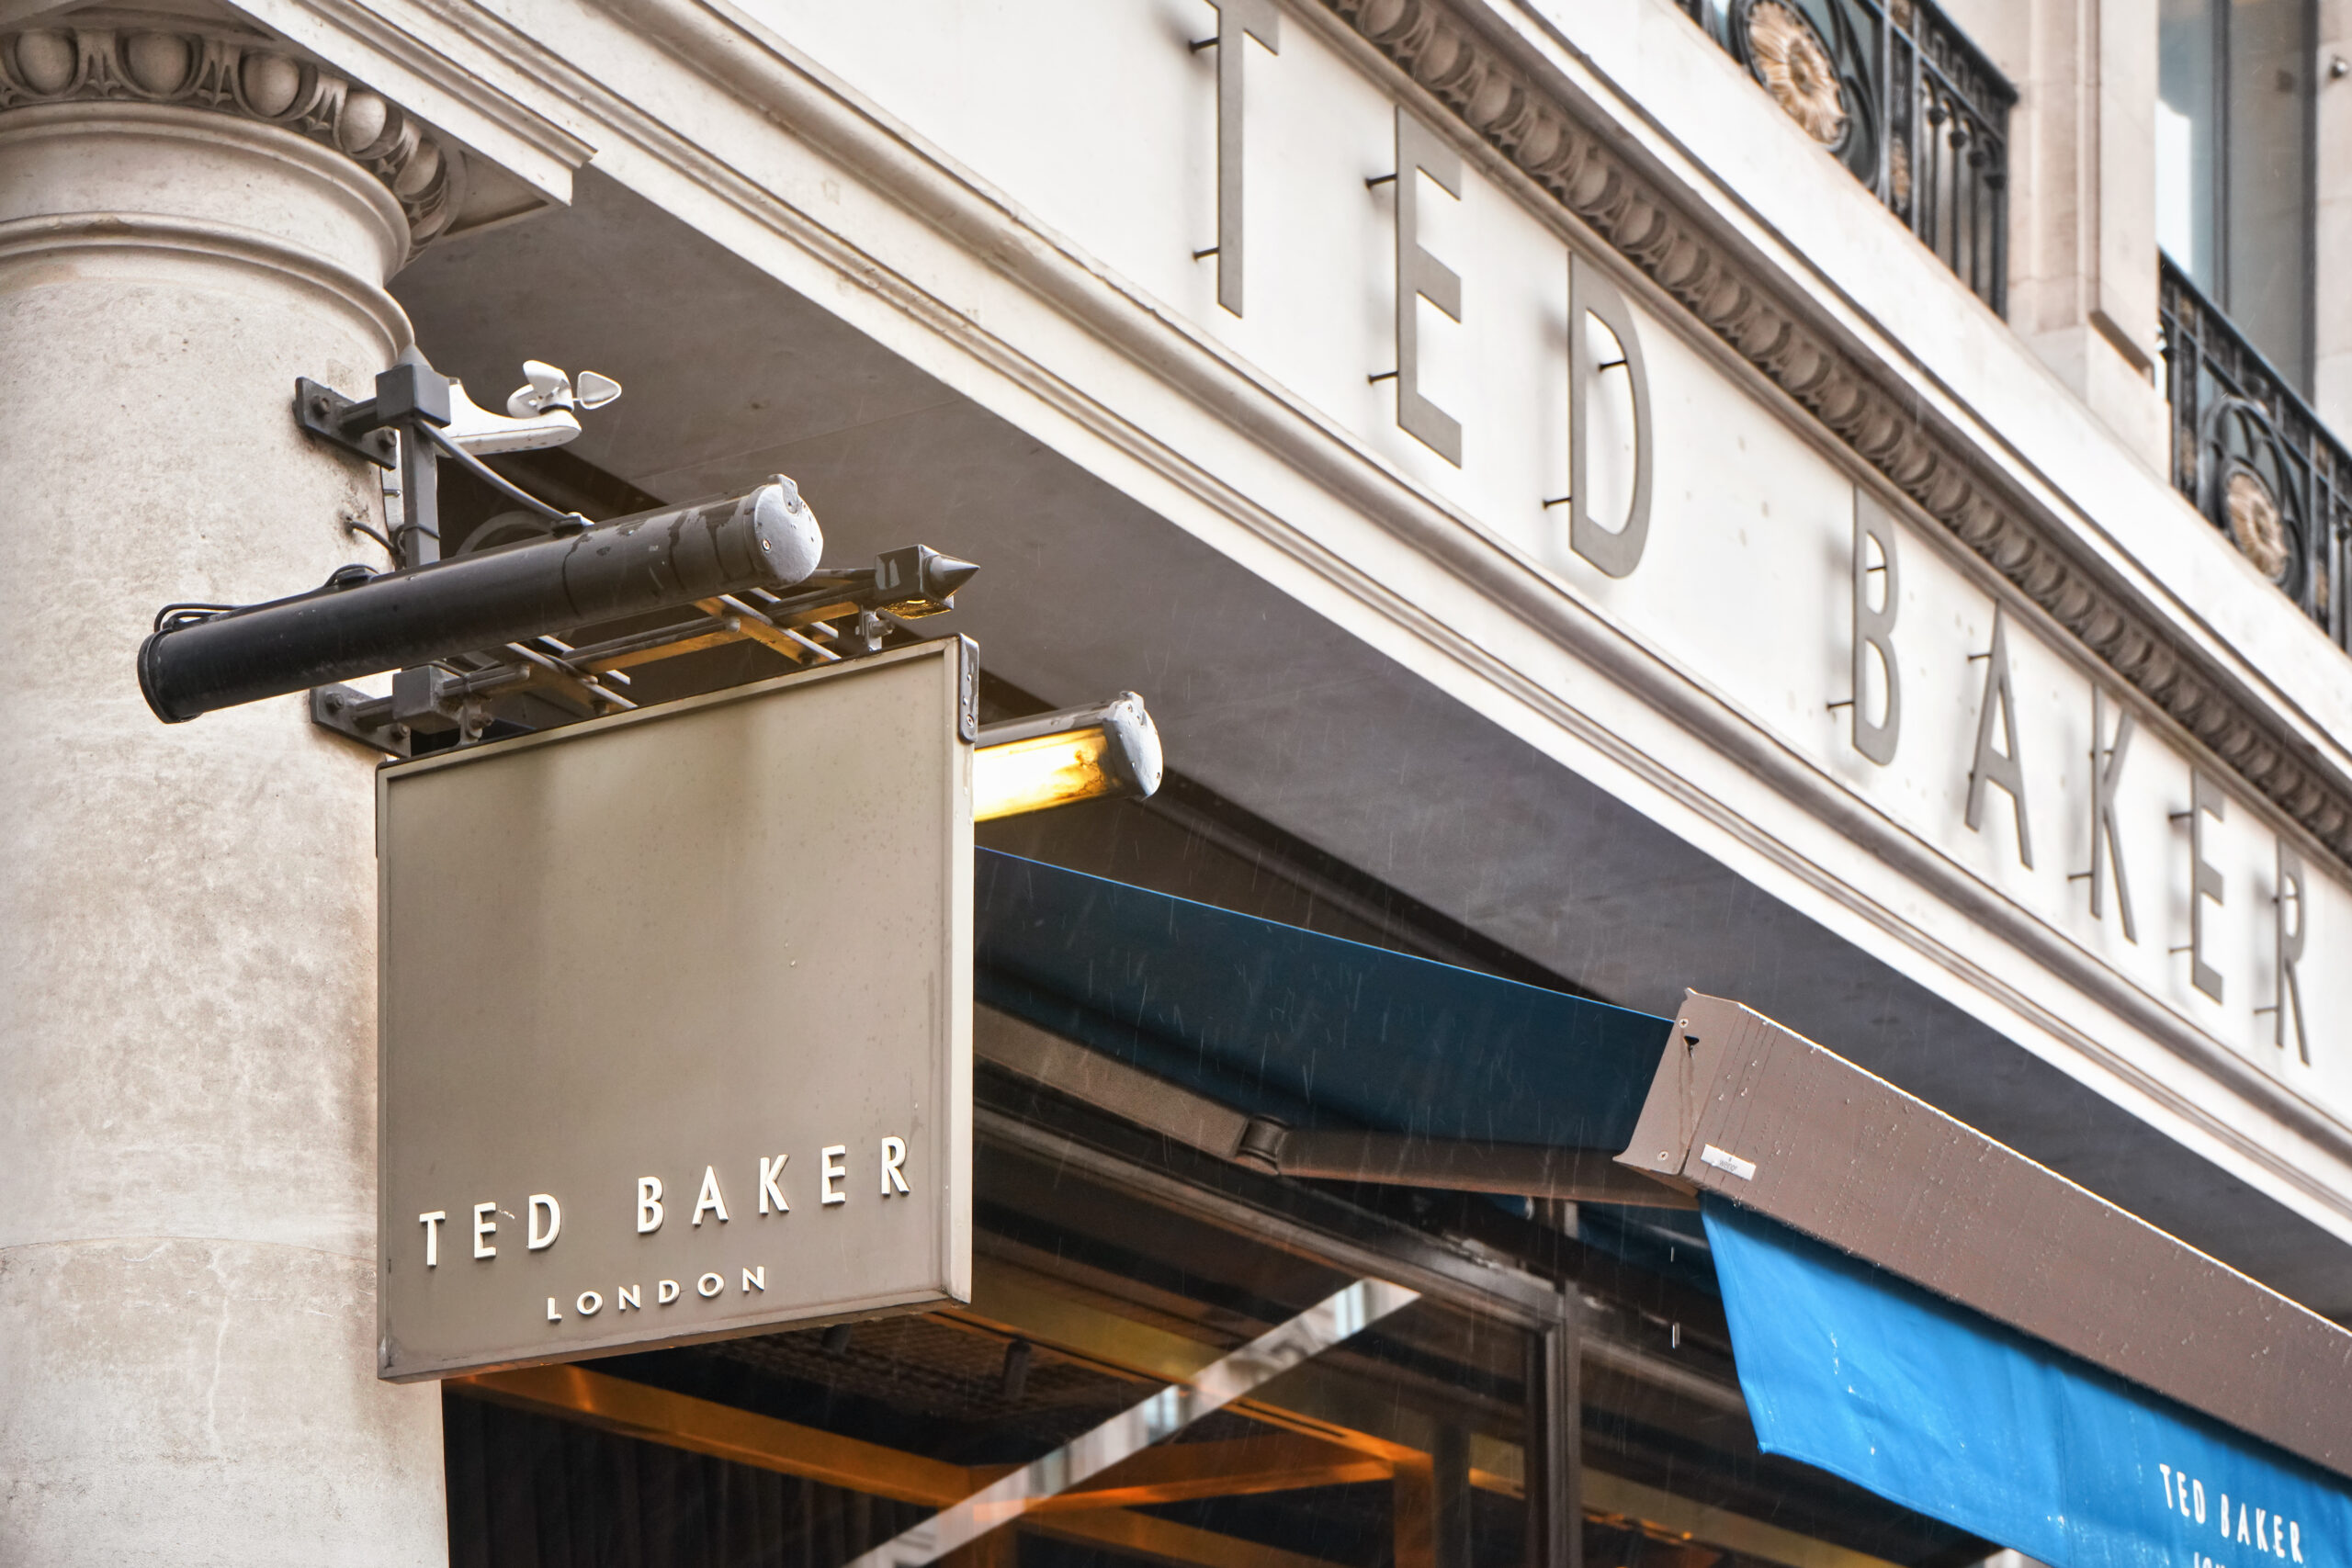 ABG completes acquisition of Ted Baker - Just Style